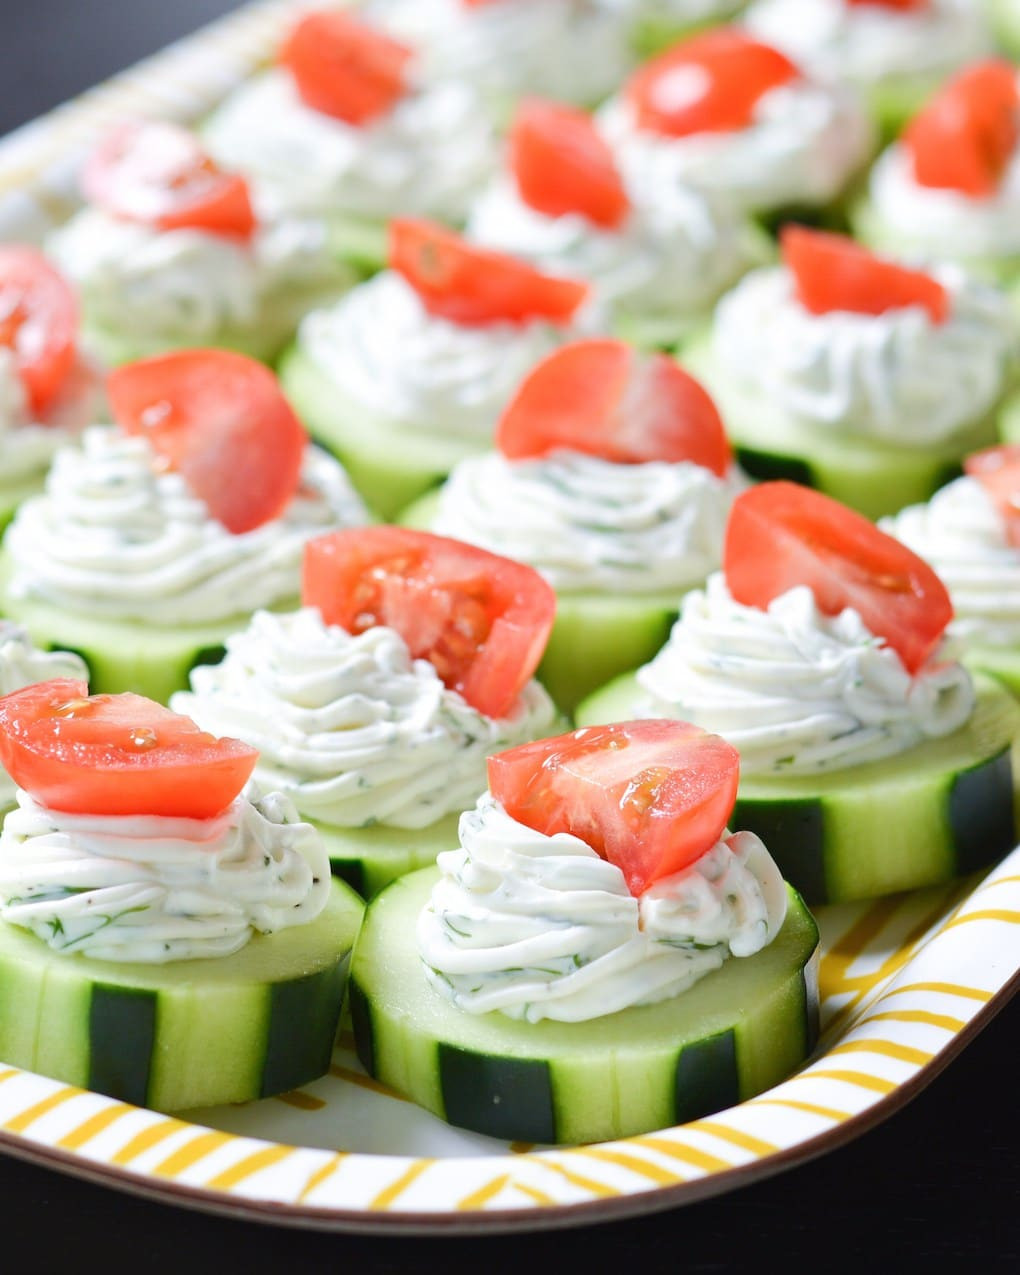 Healthy Christmas Appetizers For Parties
 18 Skinny Appetizers For Your Holiday Parties